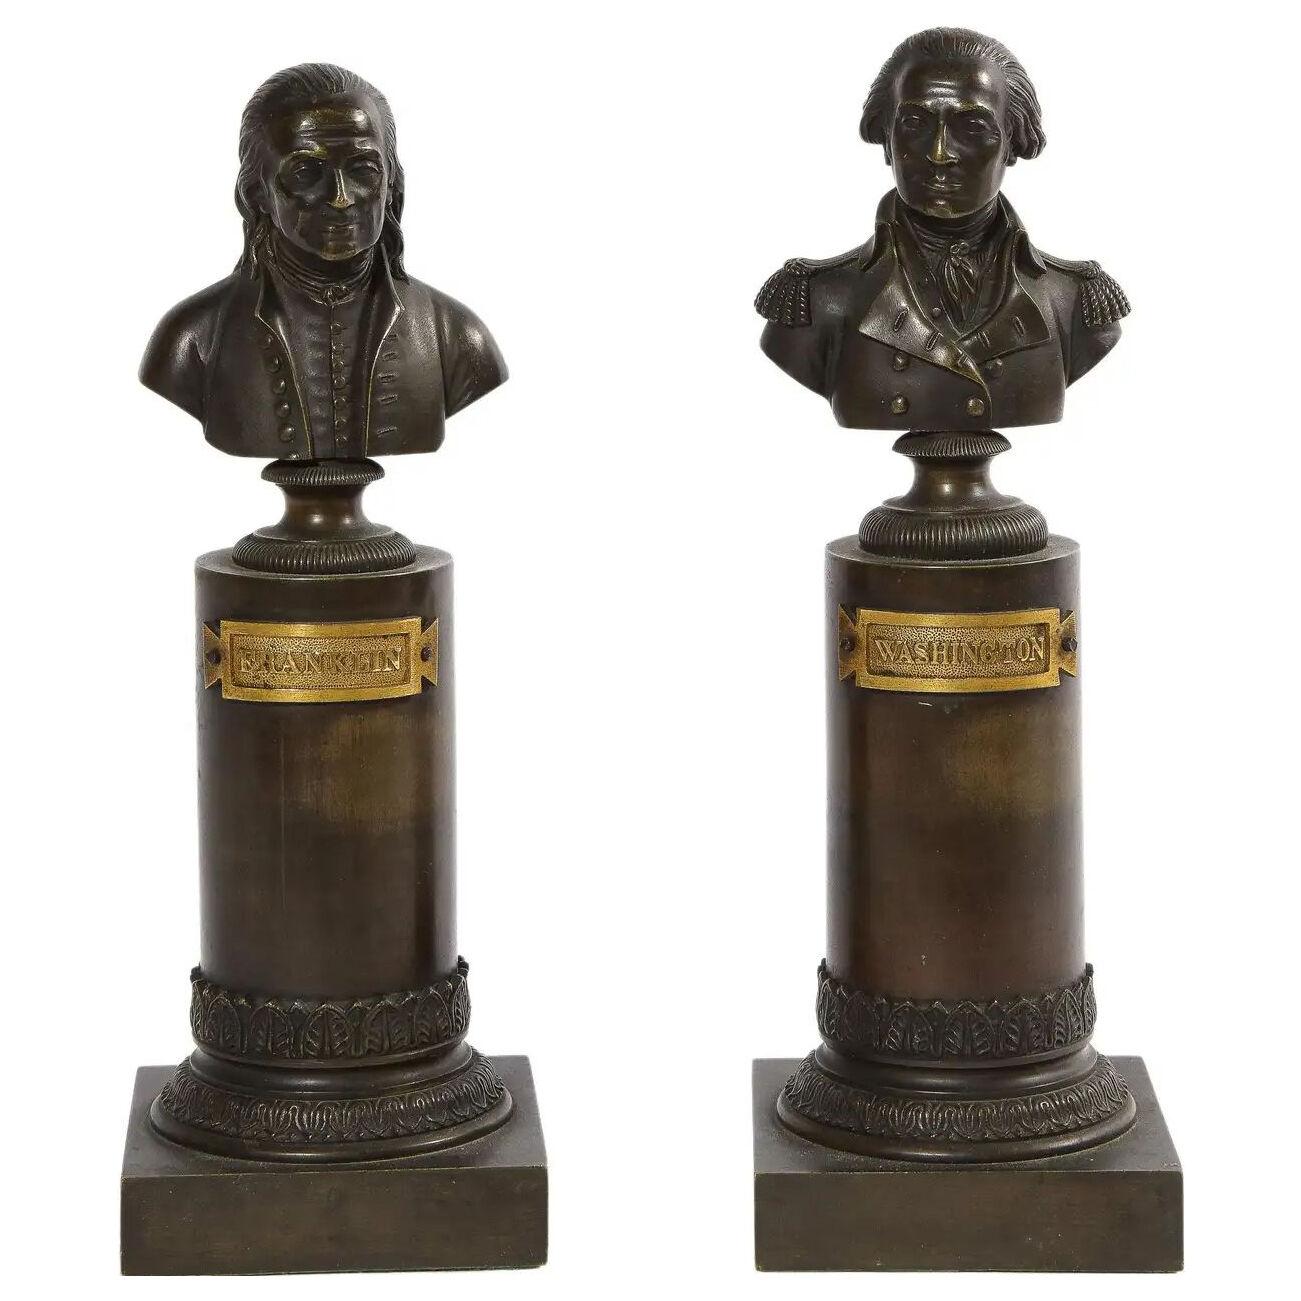 Rare Pair of American Bronze Busts of George Washington and Benjamin Franklin